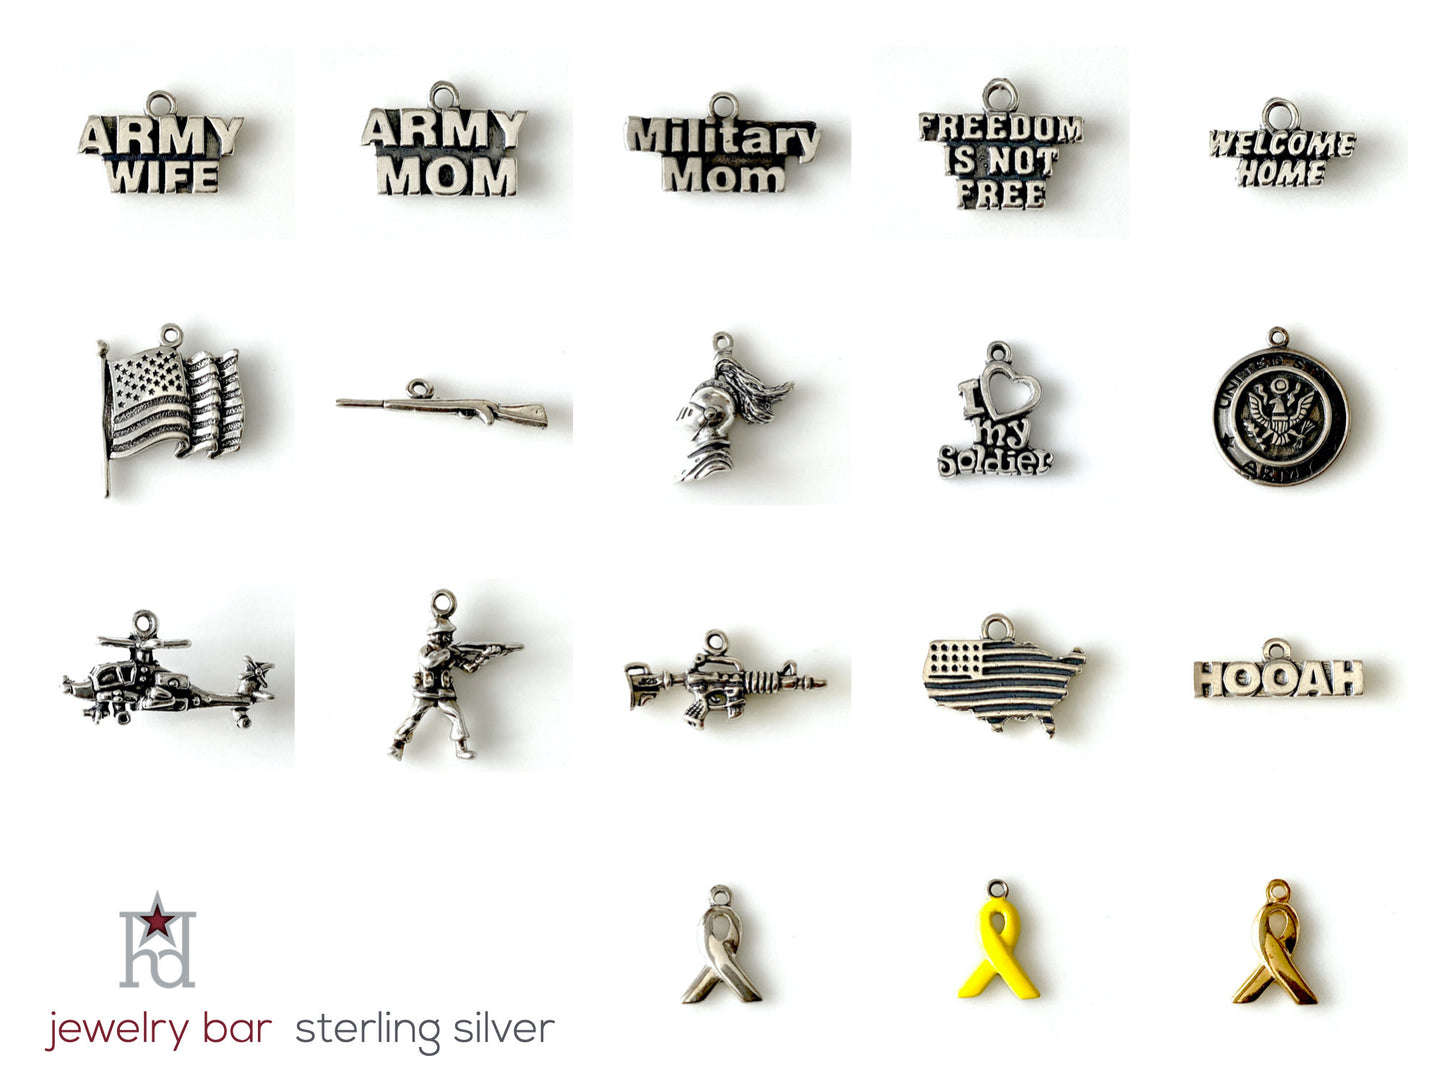 Jewelry Bar | Welcome Home Sterling Silver Charm